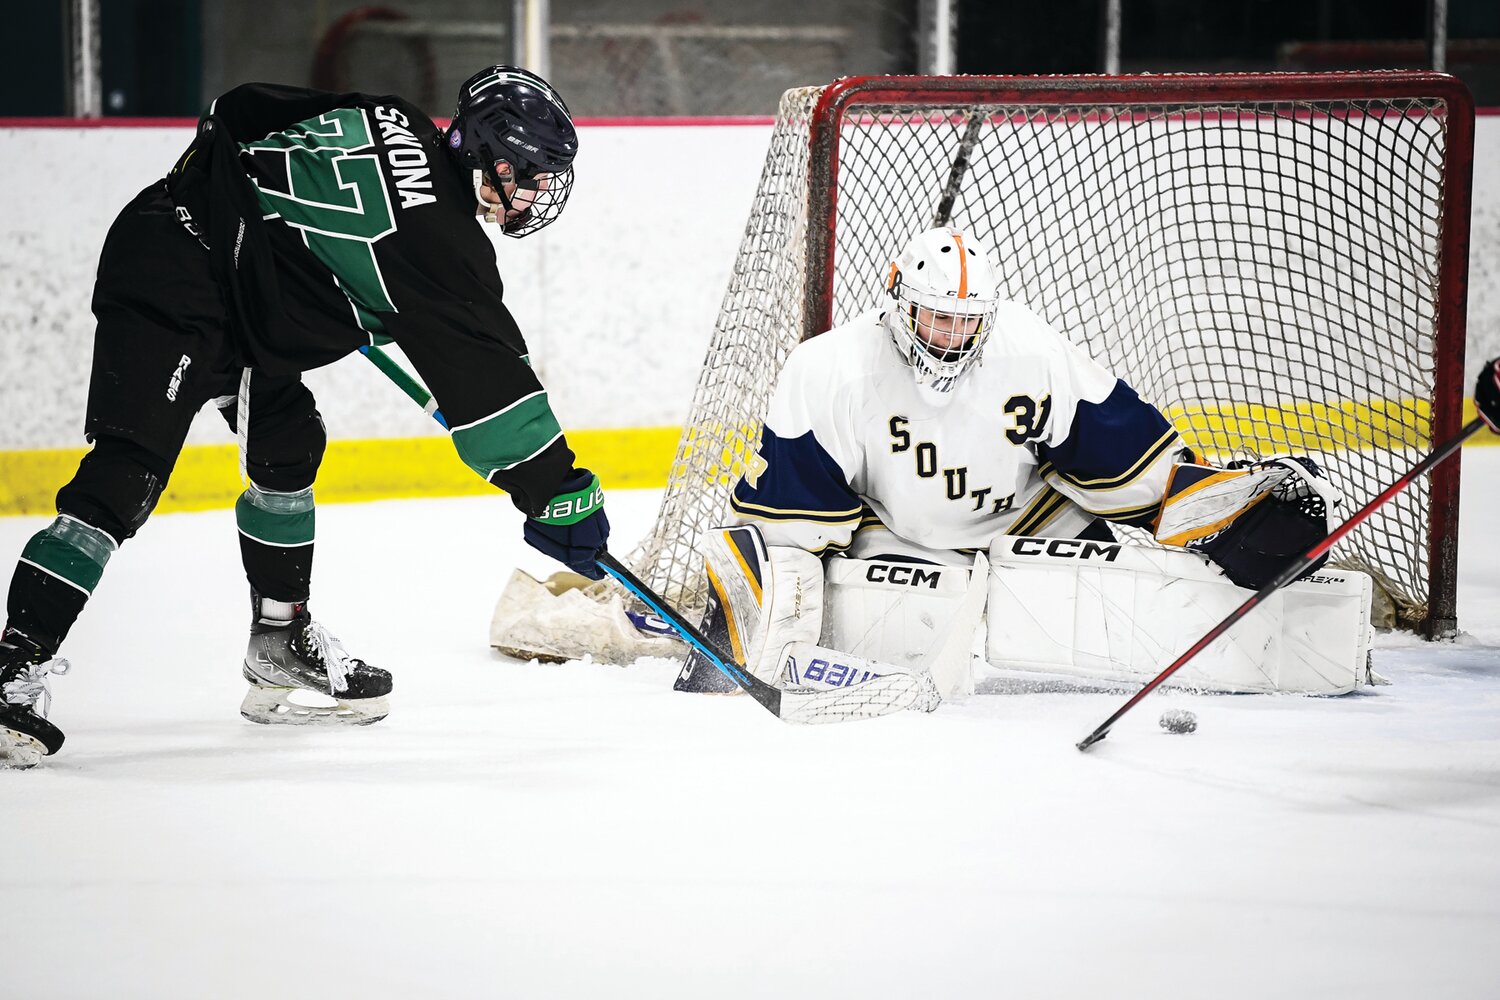 Pennridge’s Andrew Savona gets his shot stopped by Council Rock goalie Trey Prozzillo.